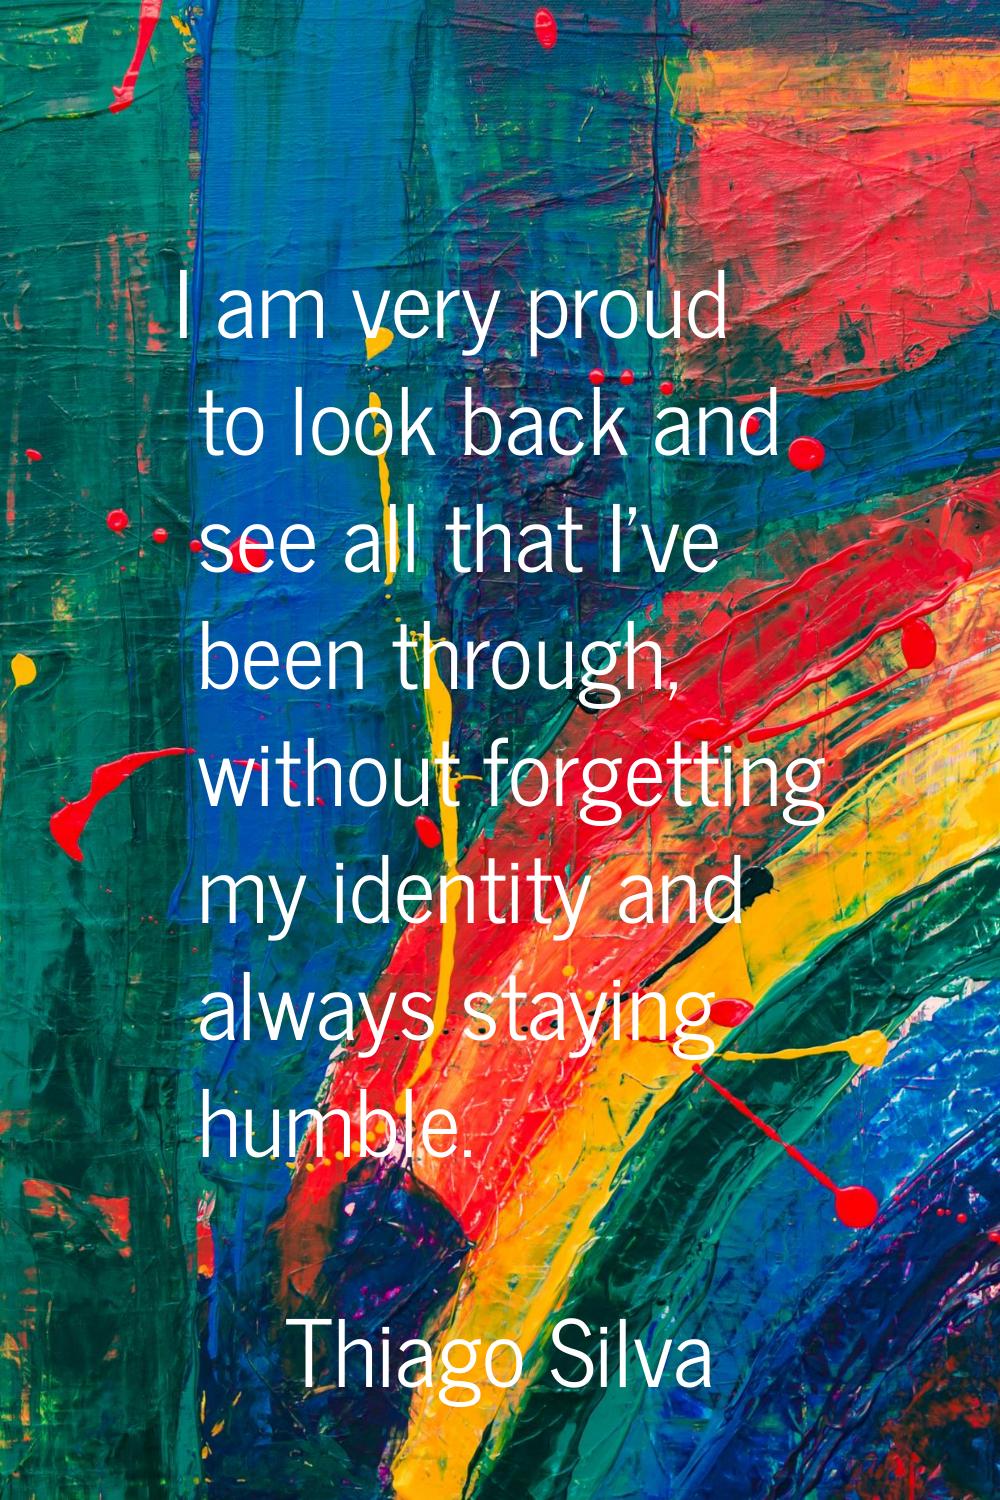 I am very proud to look back and see all that I've been through, without forgetting my identity and